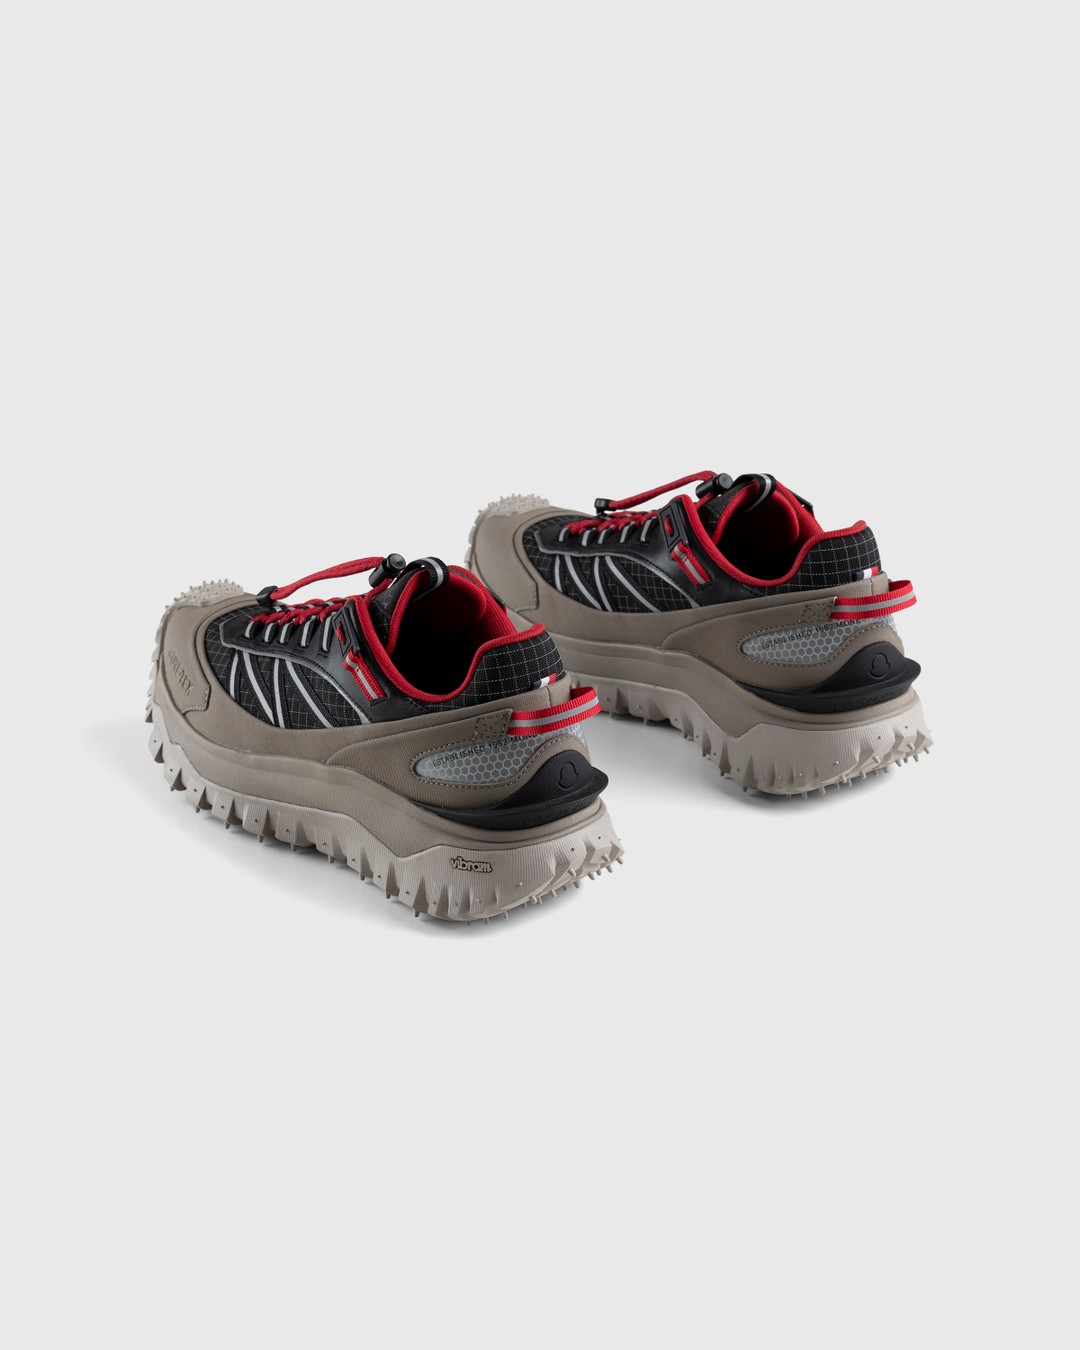 Moncler – Trailgrip GTX Sneakers Taupe - Sneakers - Beige - Image 4